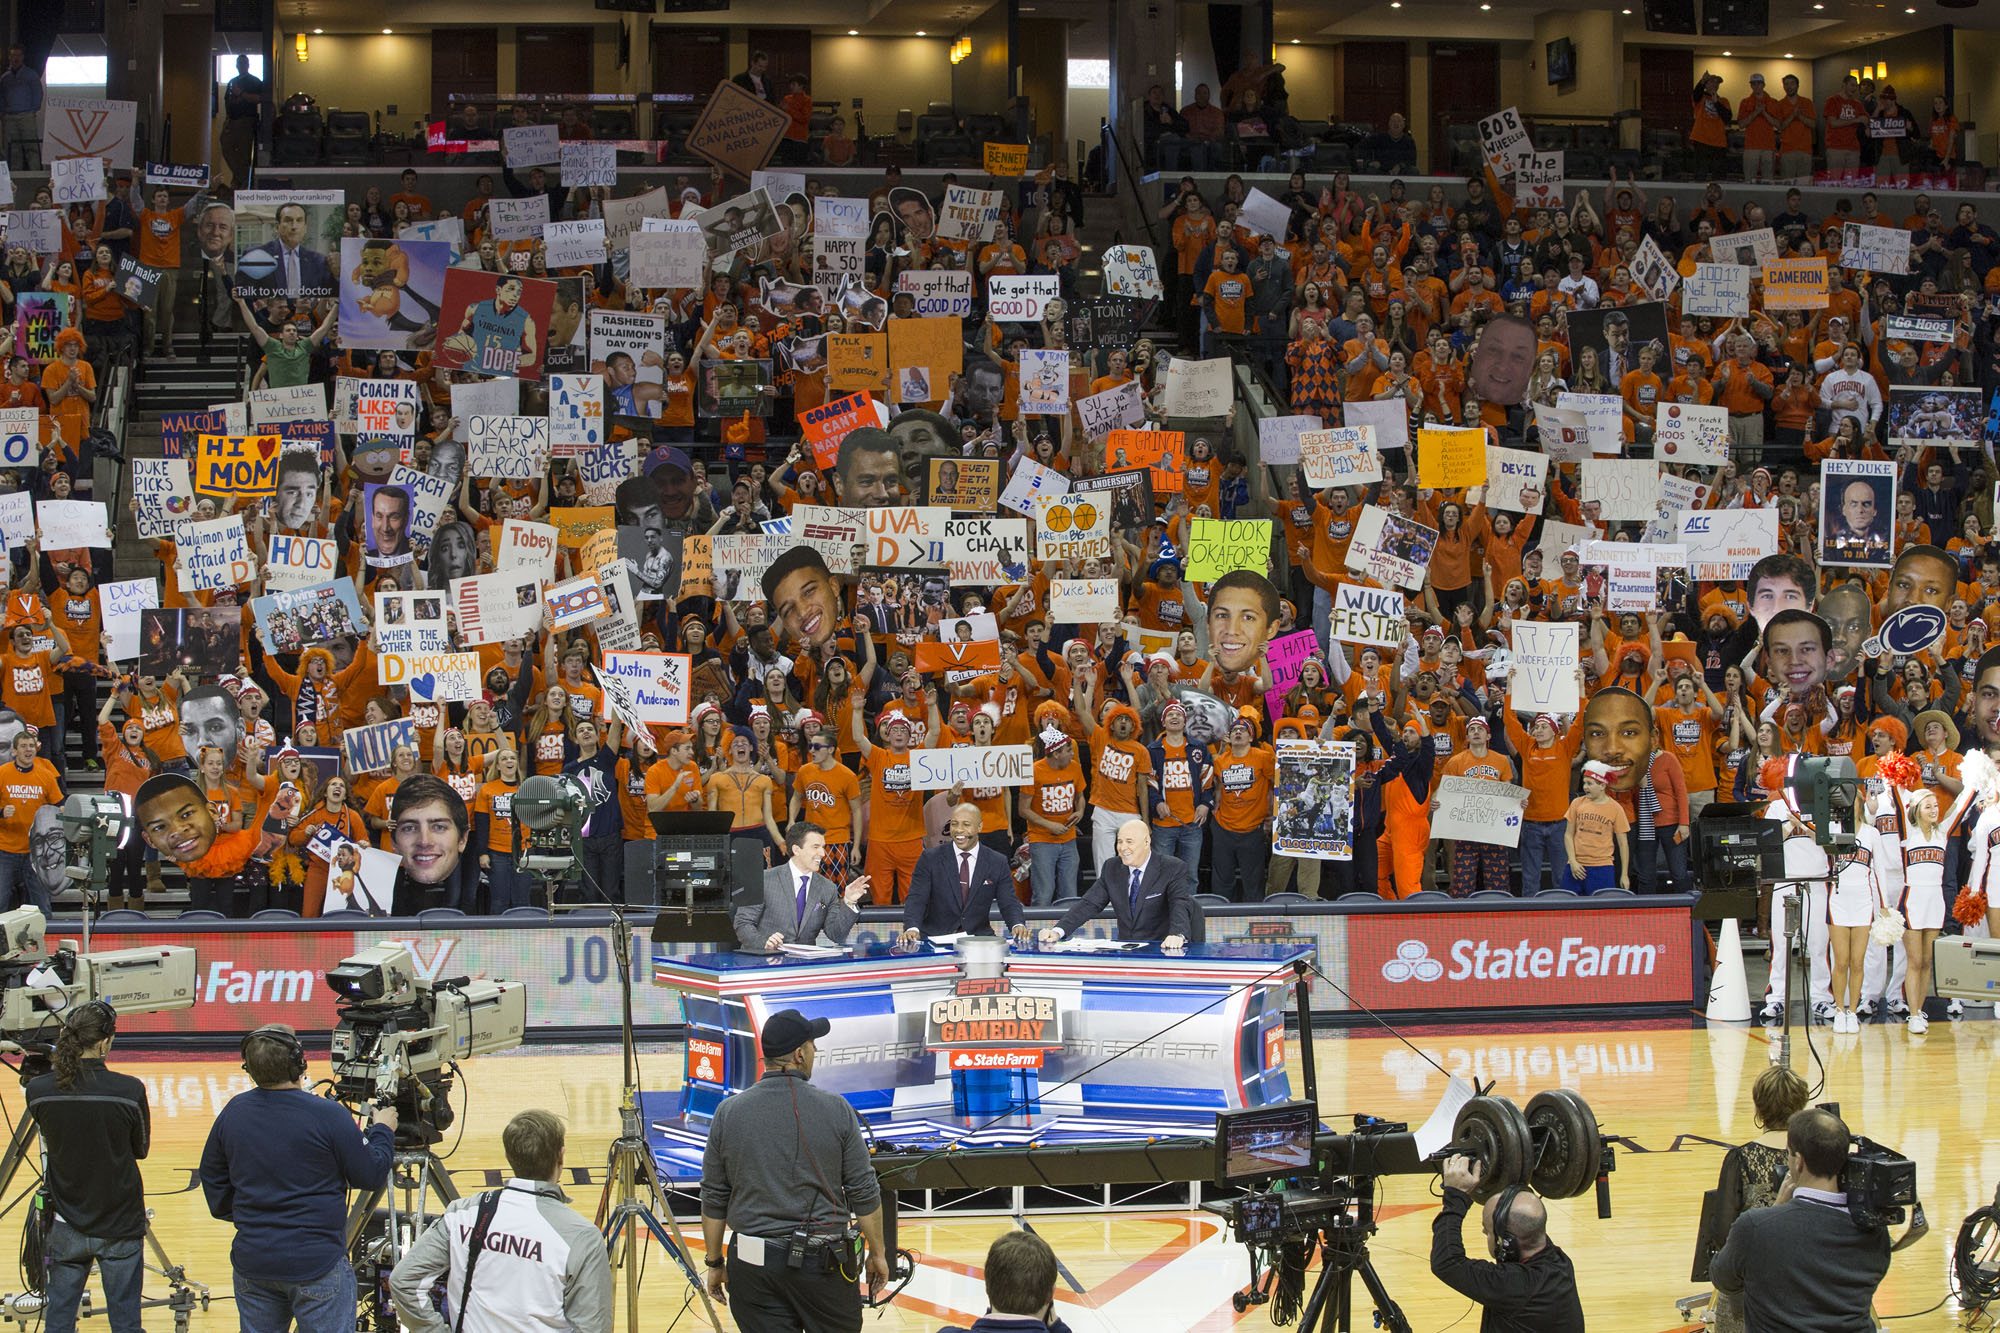 ESPN Game Day setup on the basketball court filming while UVA fans cheer behind them